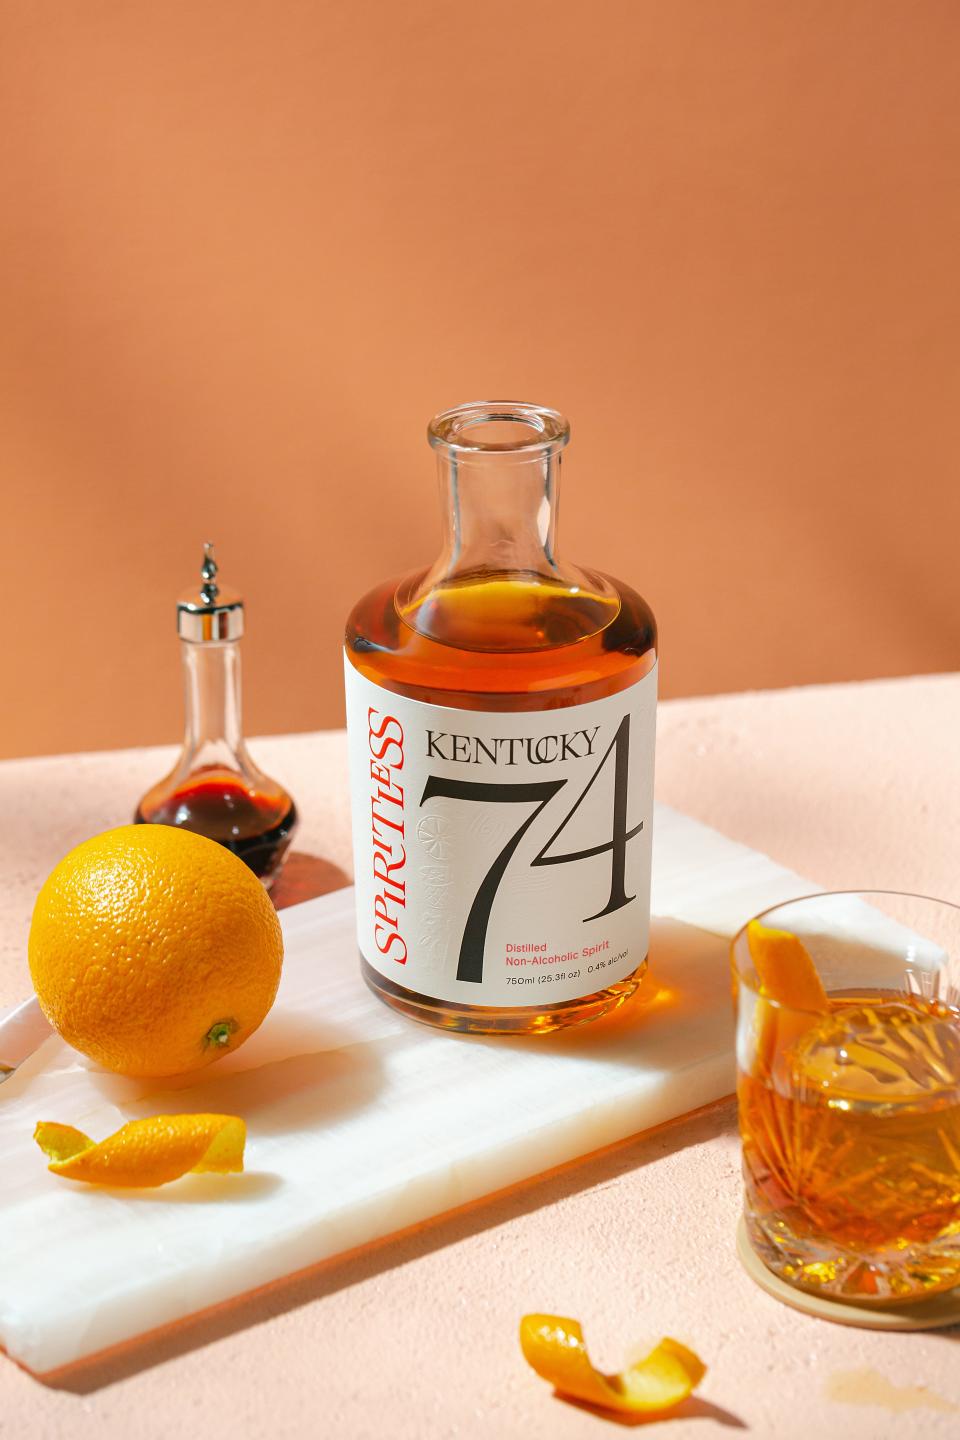 Kentucky 74 is Spiritless' first production, a distilled, non-alcoholic spirit that mimics the taste and feel of bourbon.